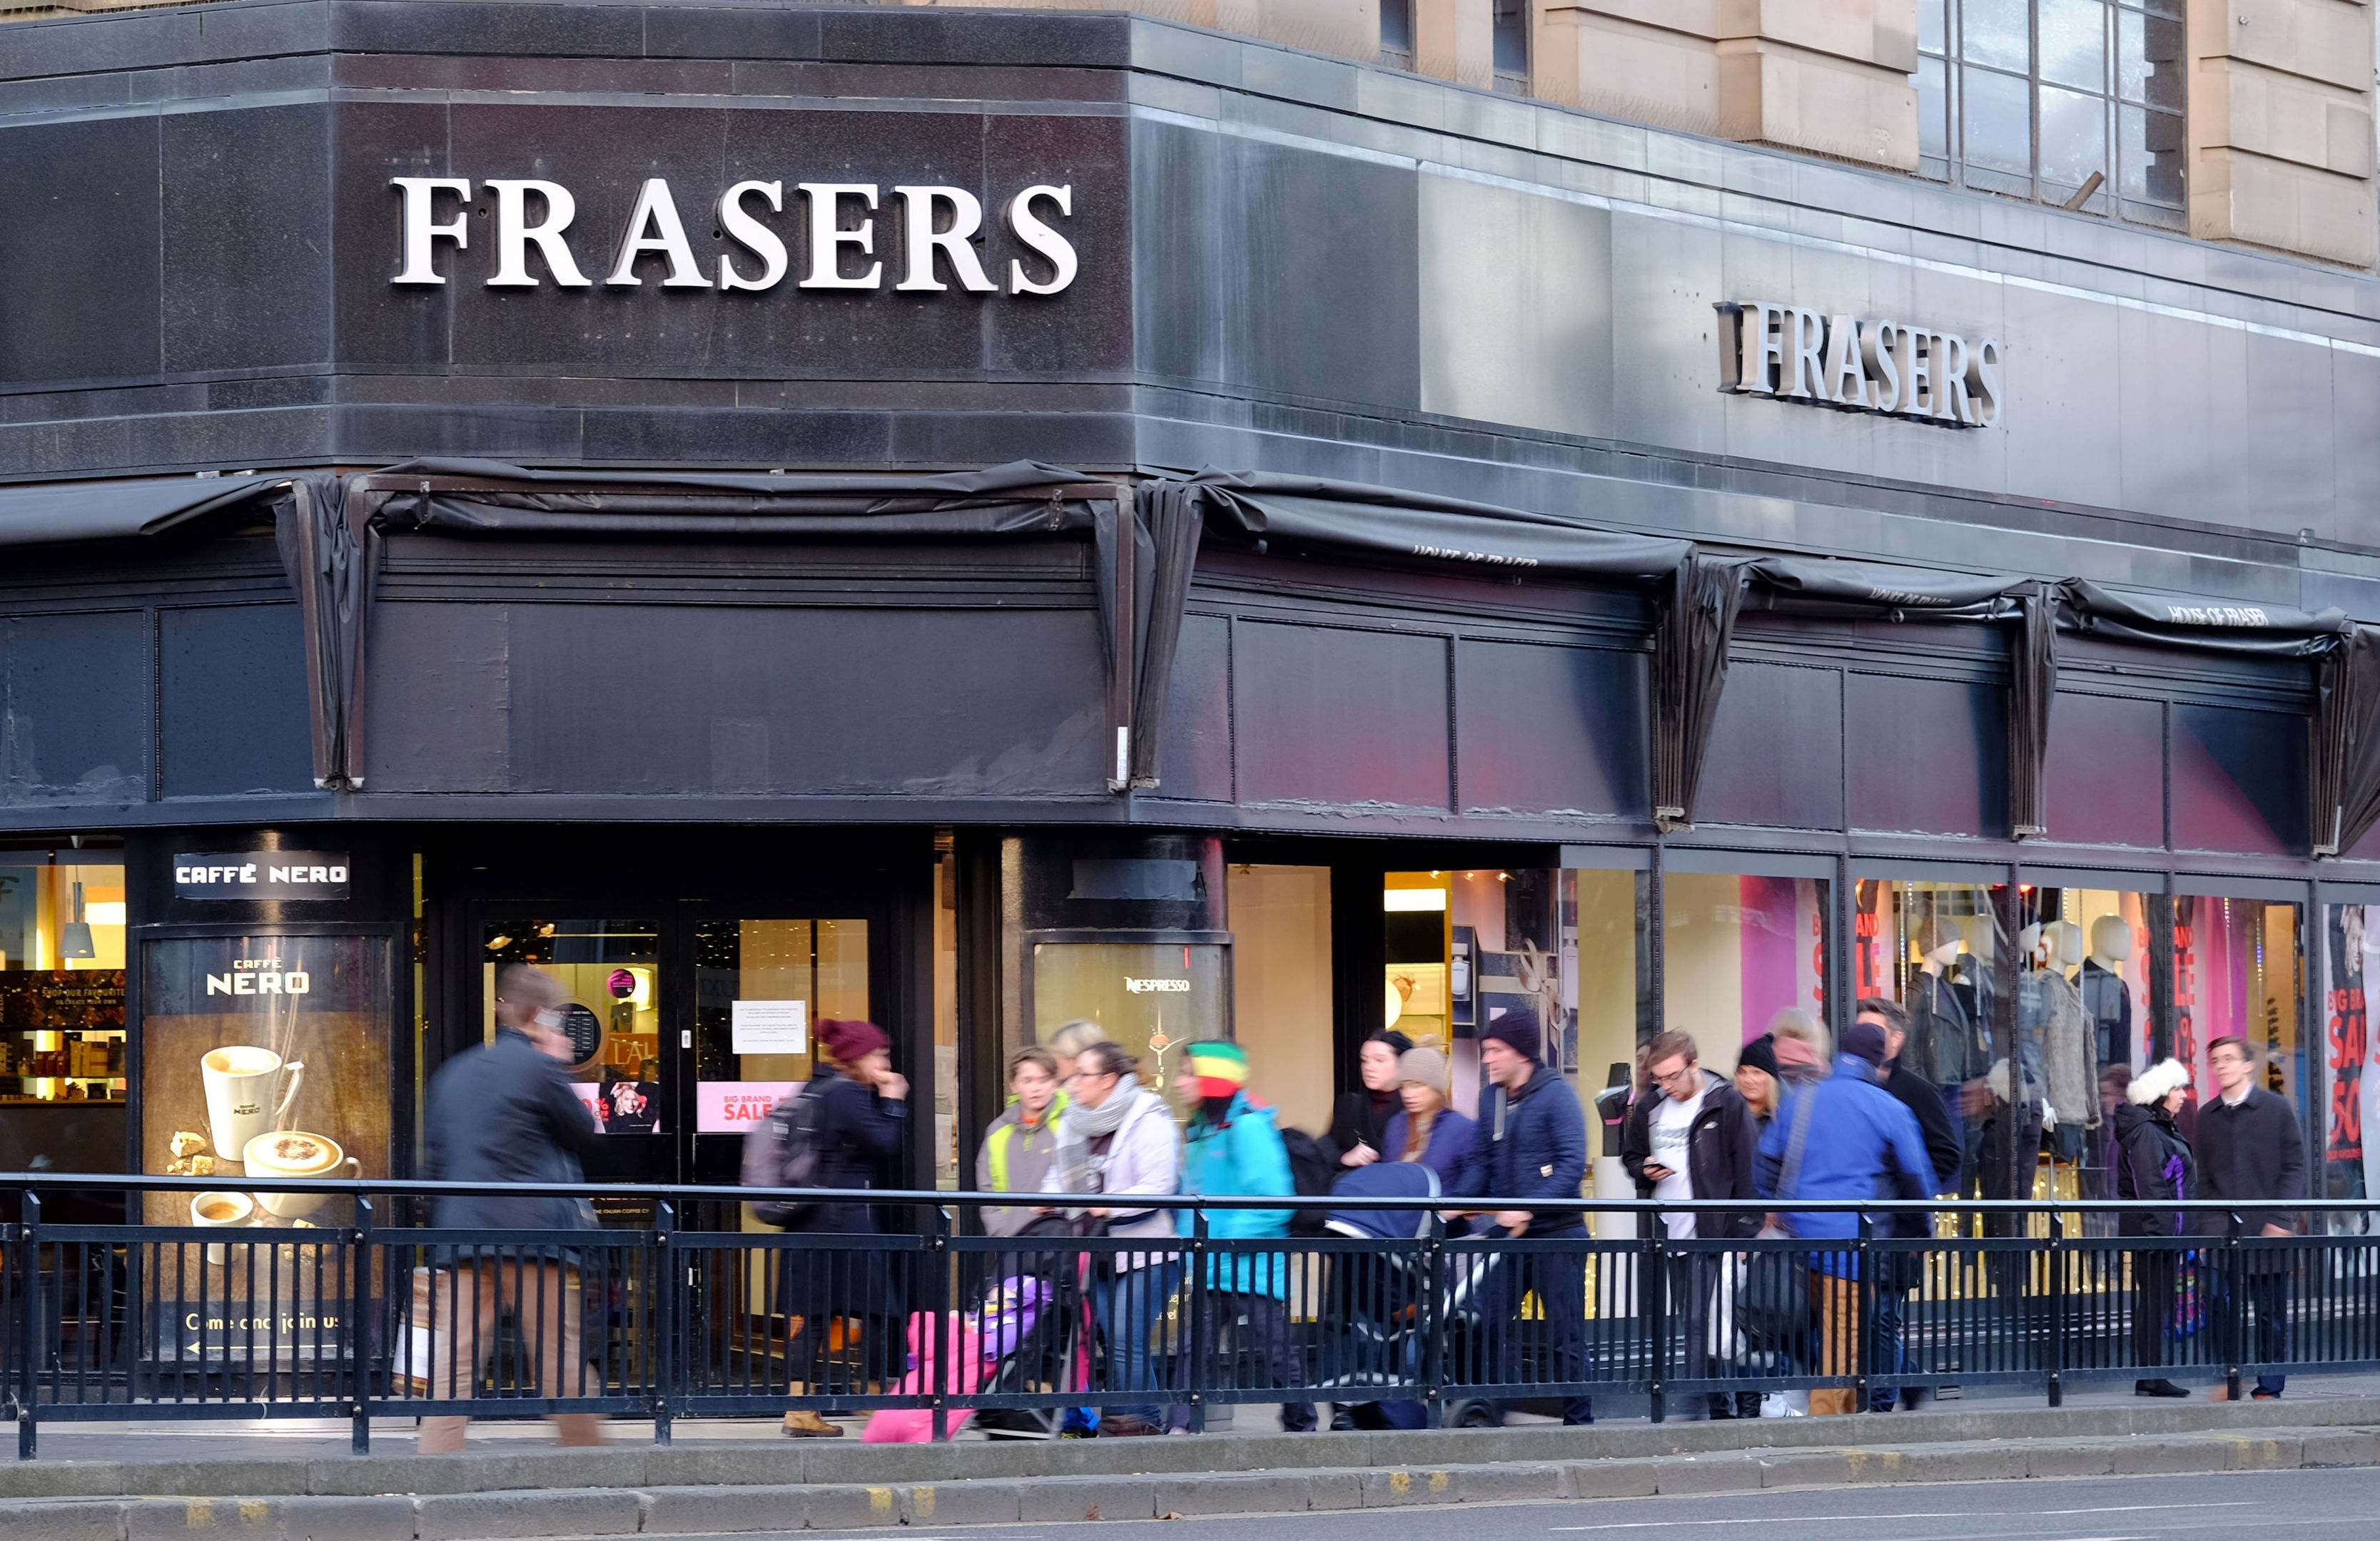 Edinburgh store among House of Fraser outlets earmarked for closure - The Sunday Post